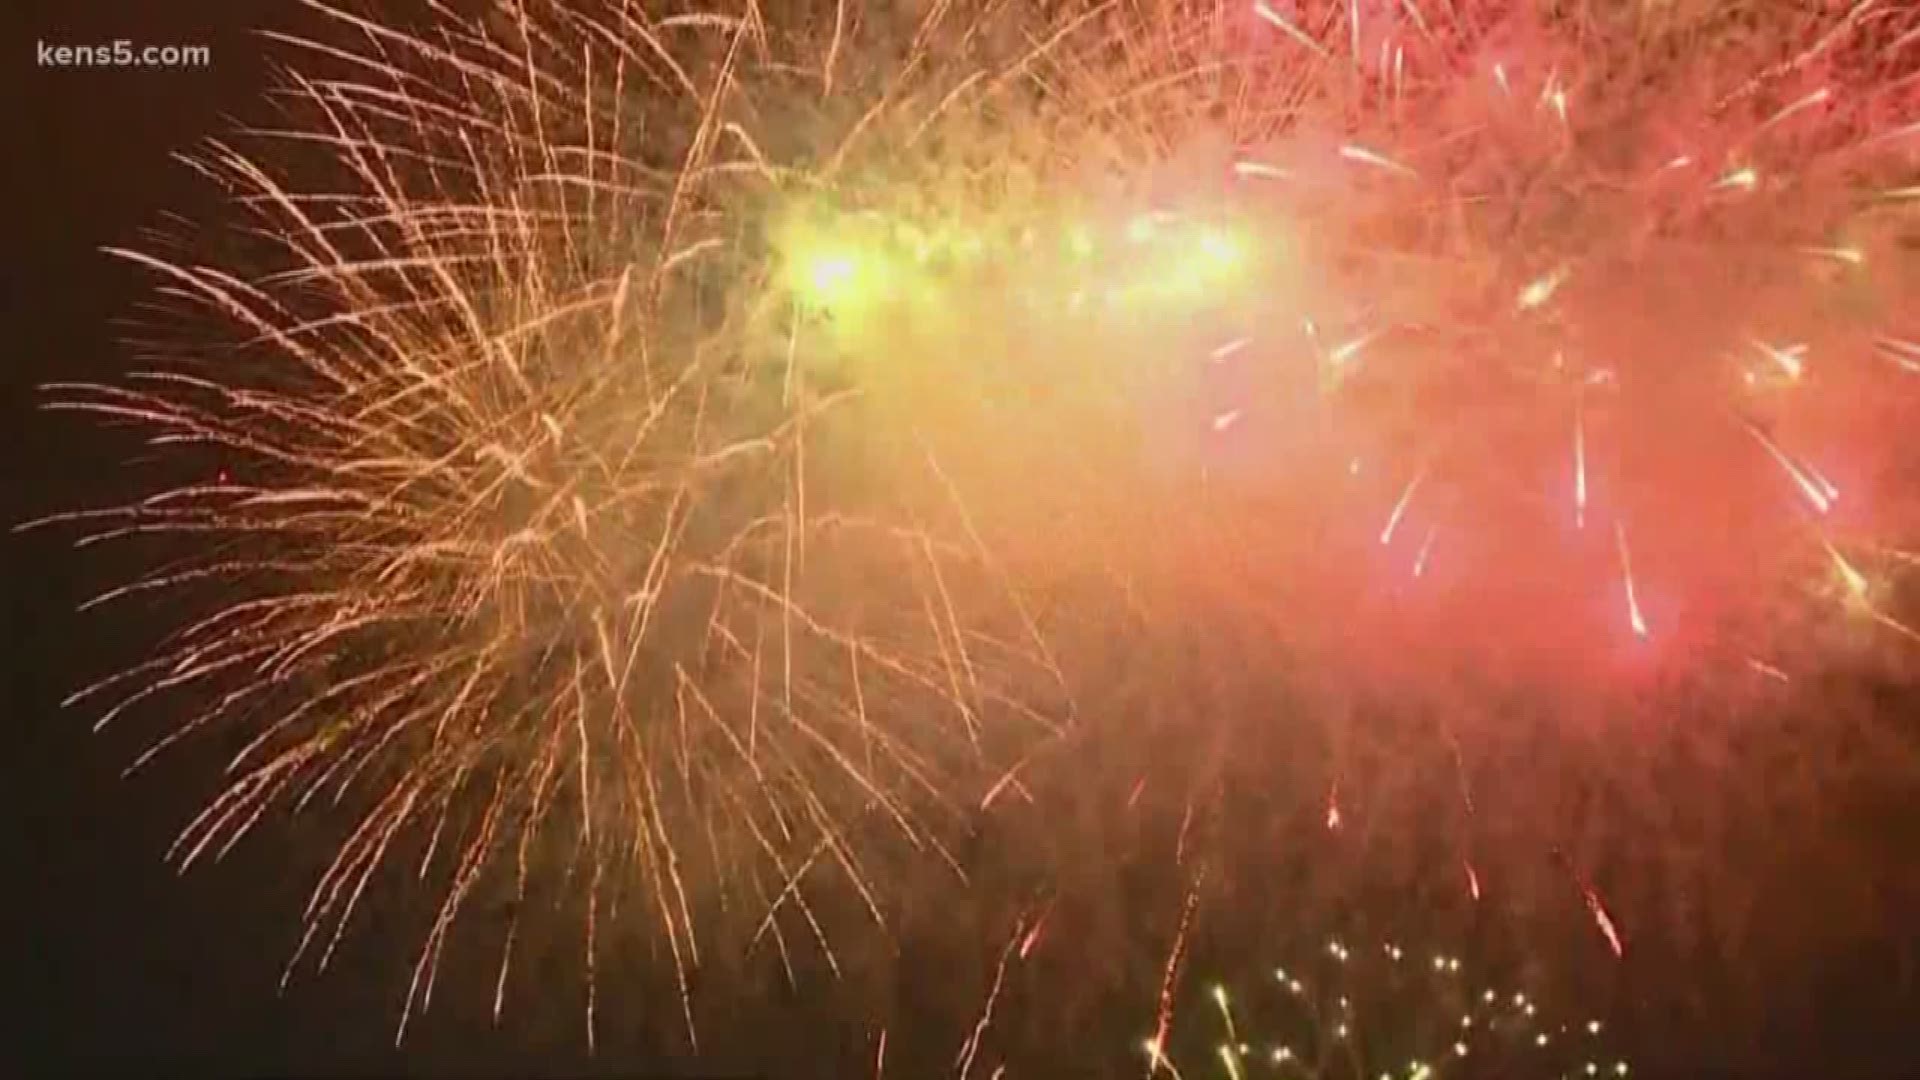 The City of San Antonio spent around $300,000 to put on a fireworks show worthy of a tricentennial celebration.